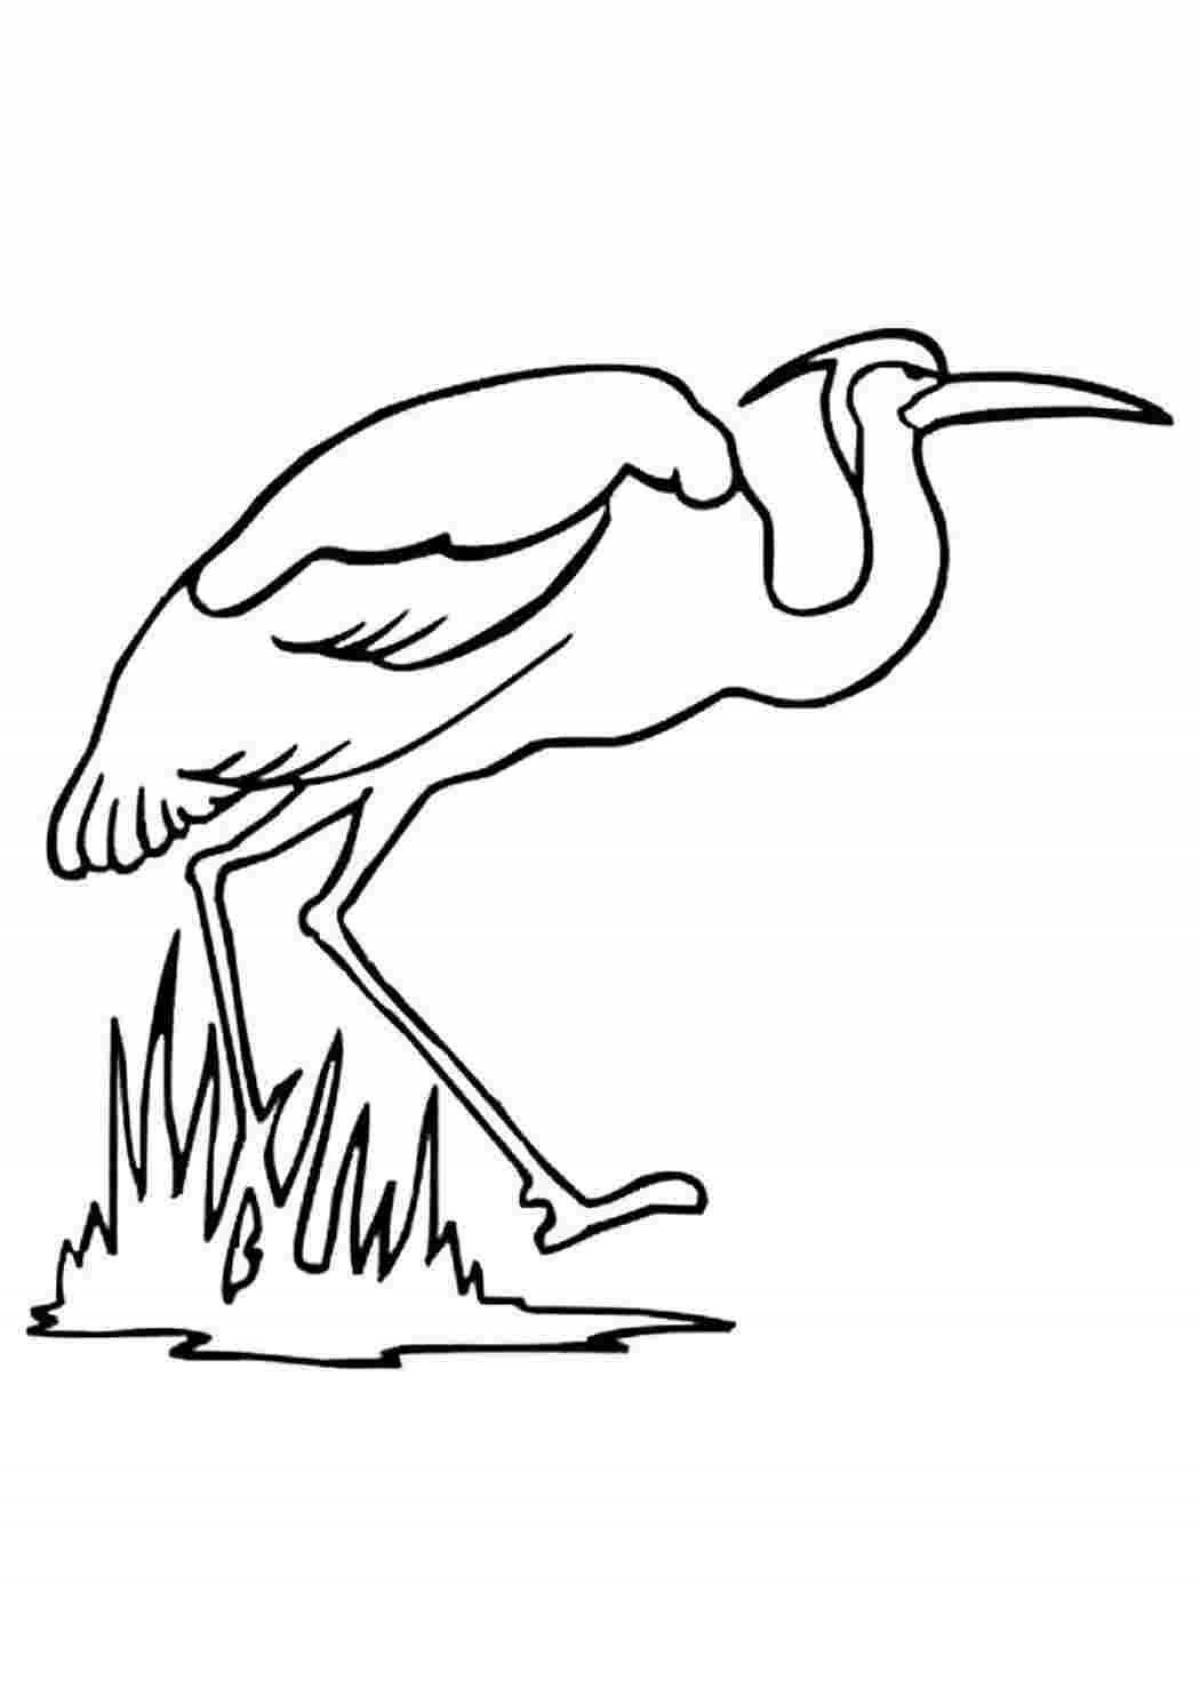 Colorful heron coloring page for kids